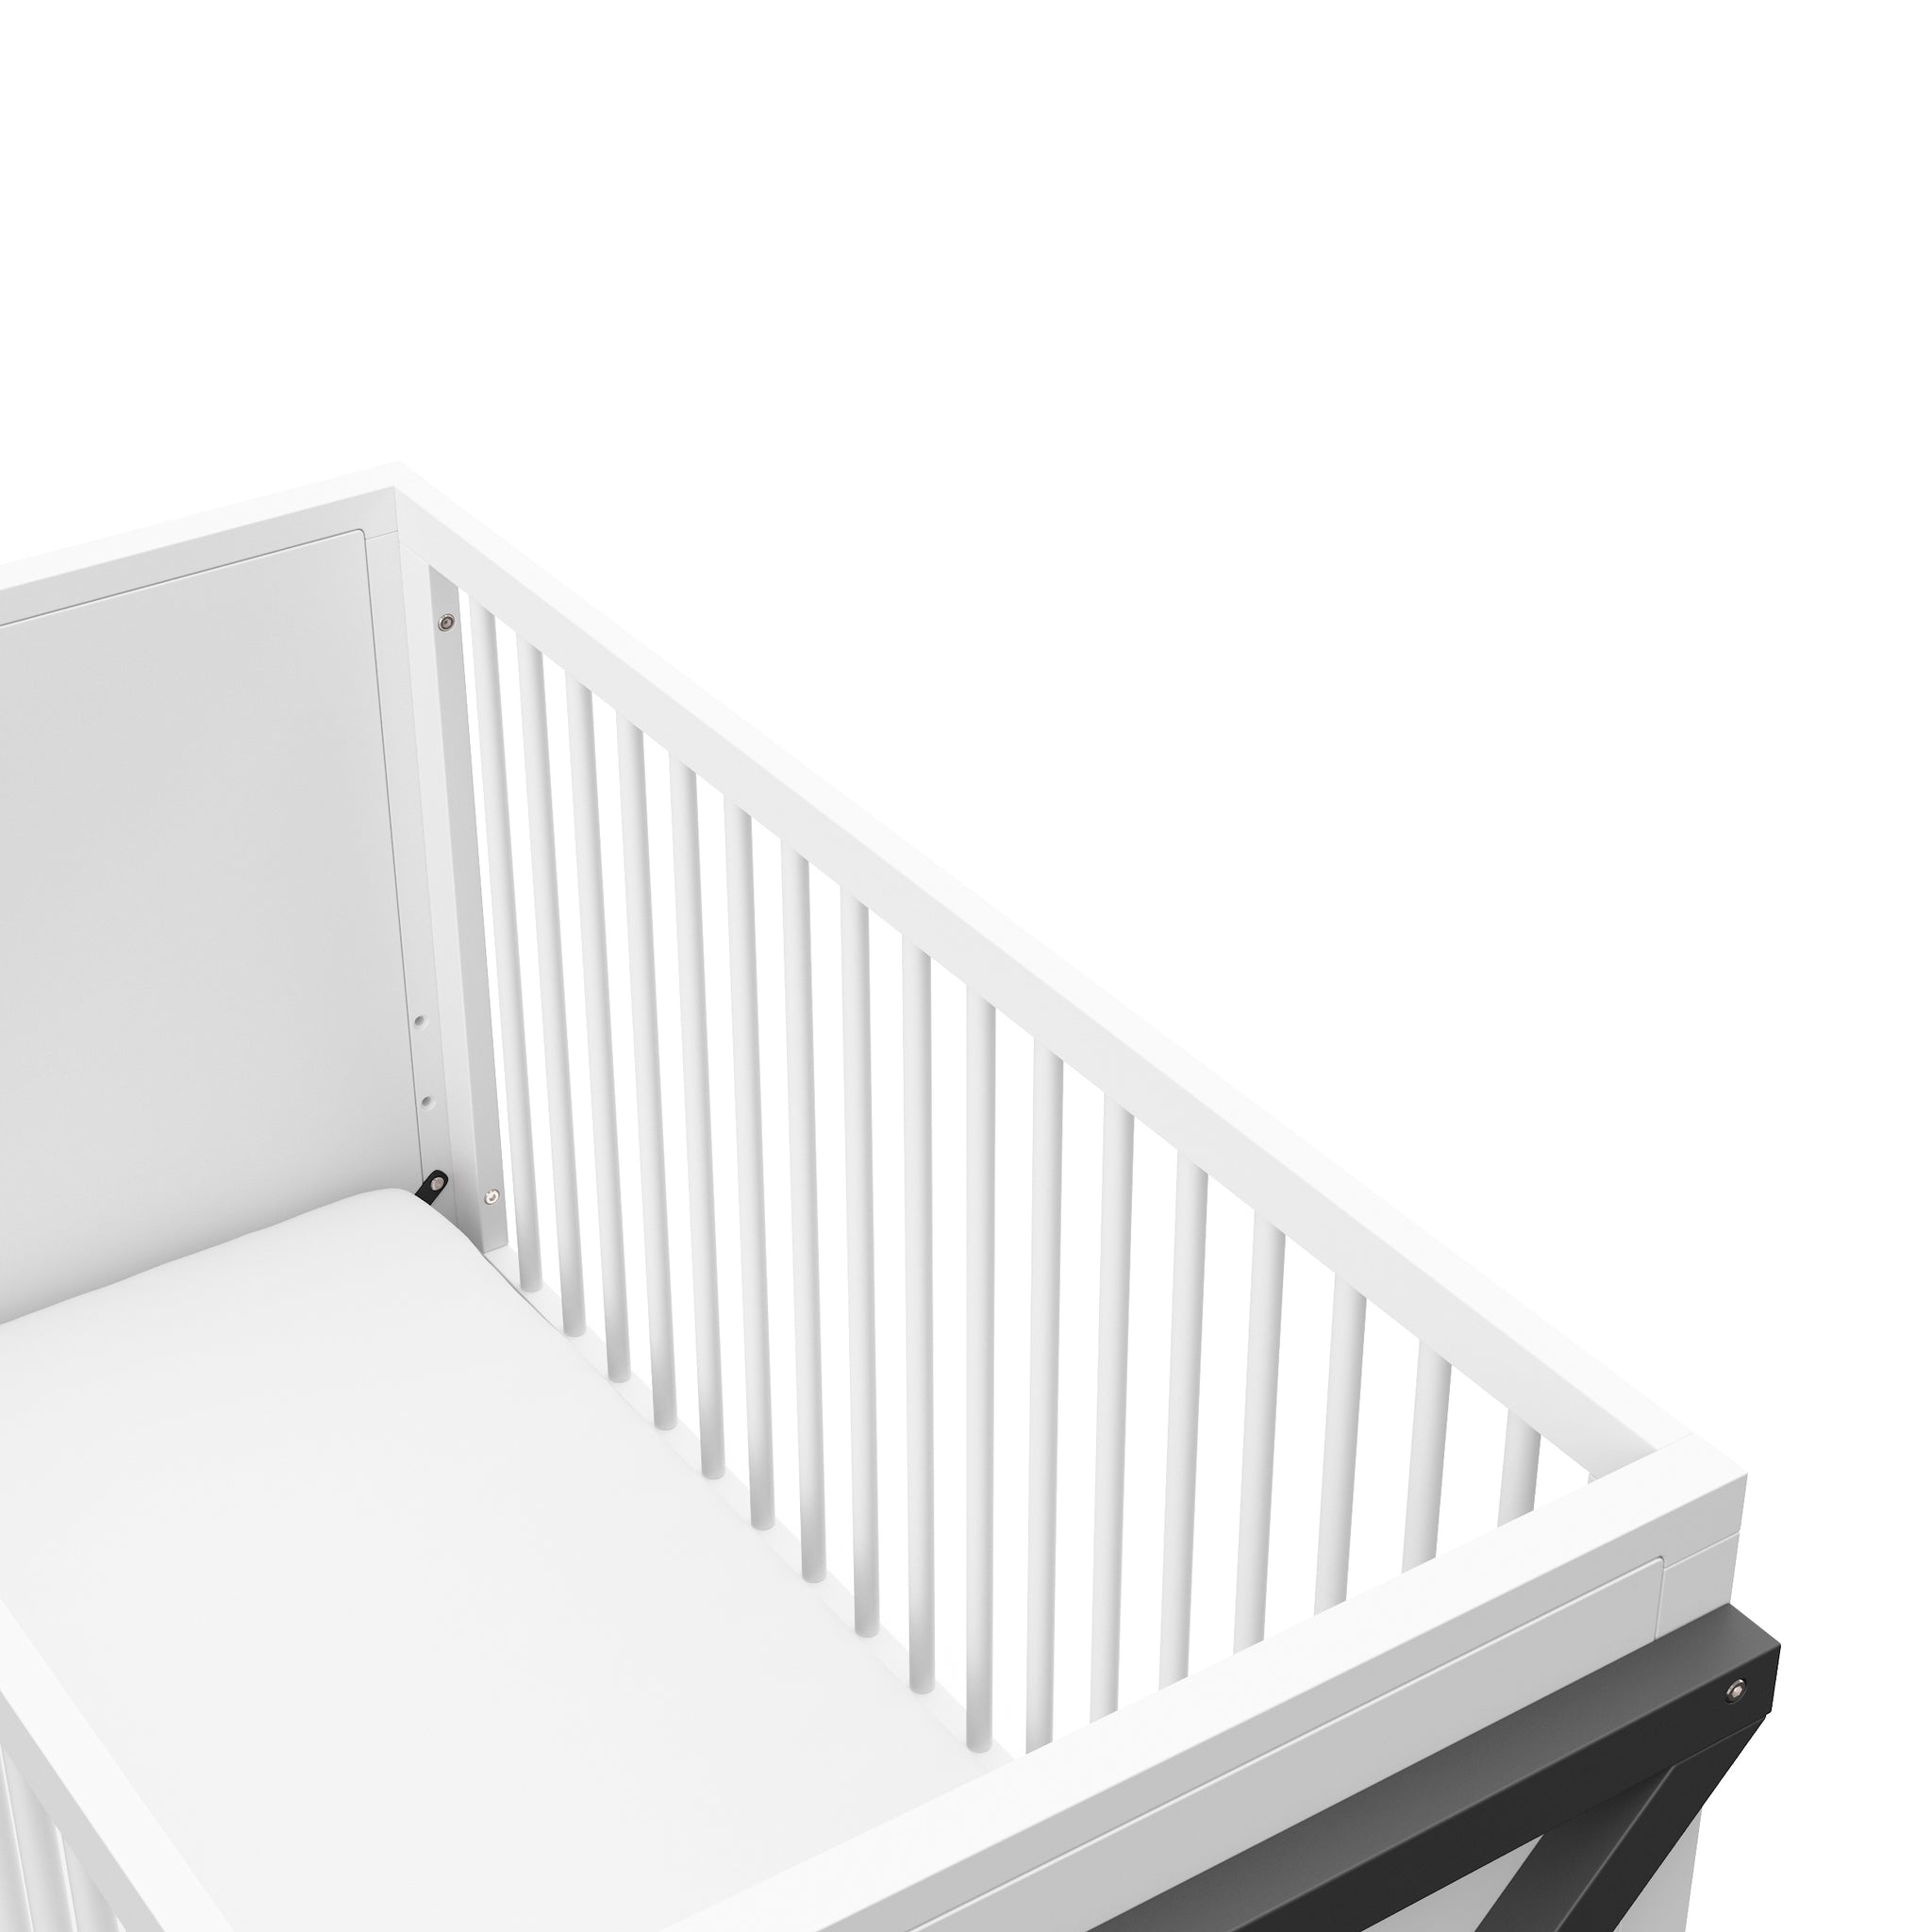 Close-up view of white with gray crib's headboard